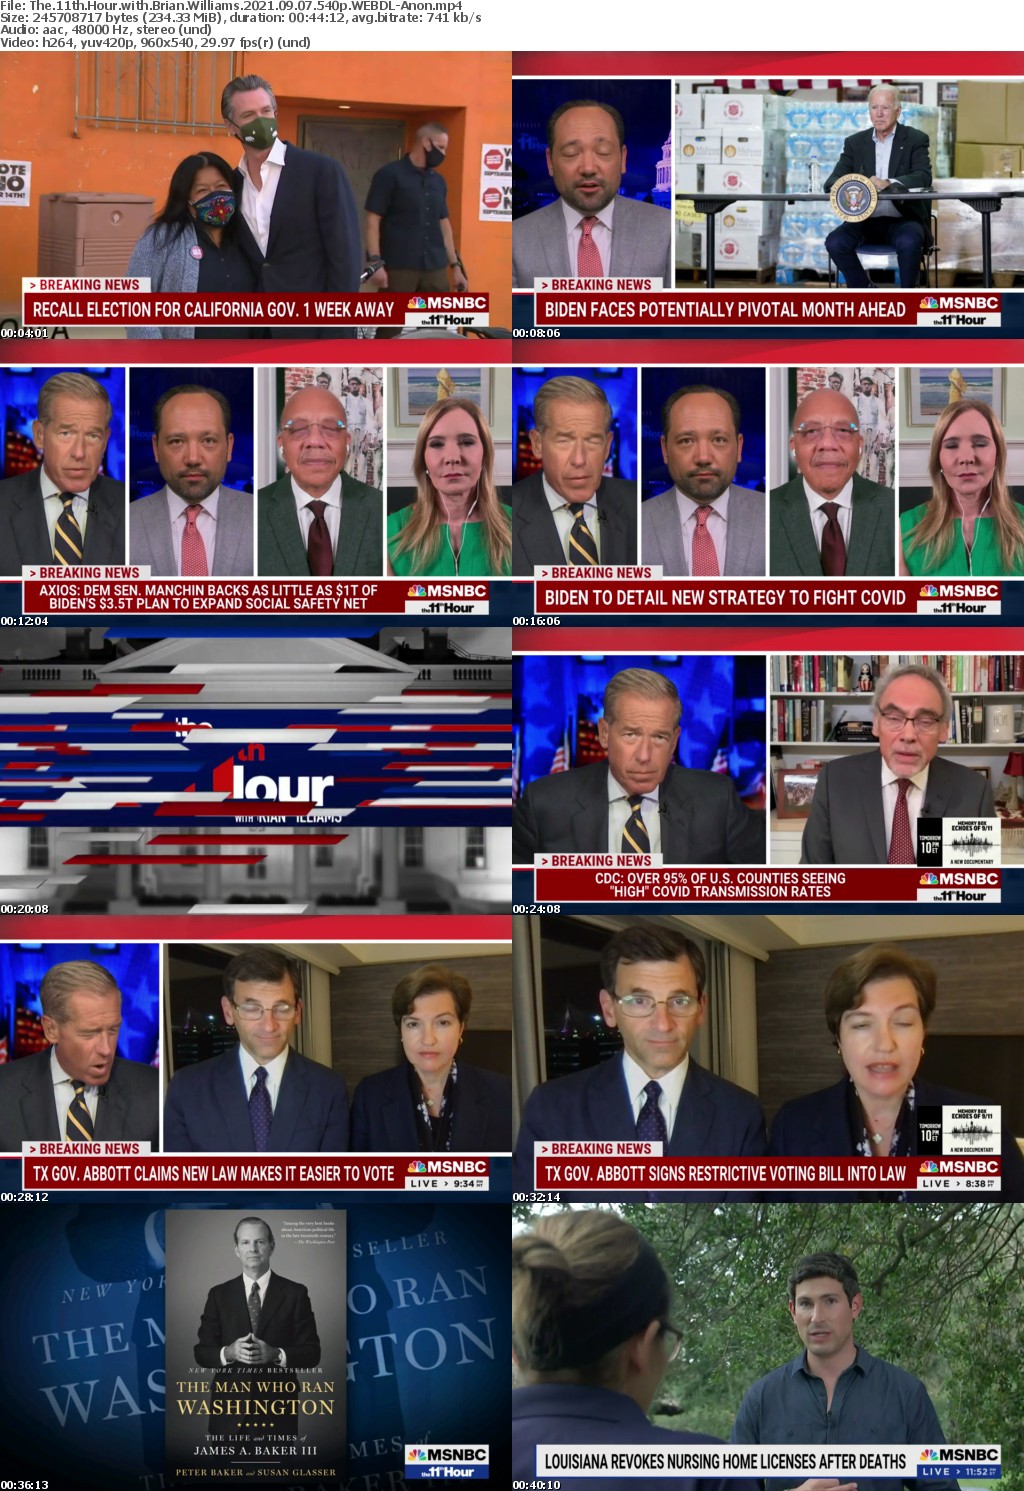 The 11th Hour with Brian Williams 2021 09 07 540p WEBDL-Anon